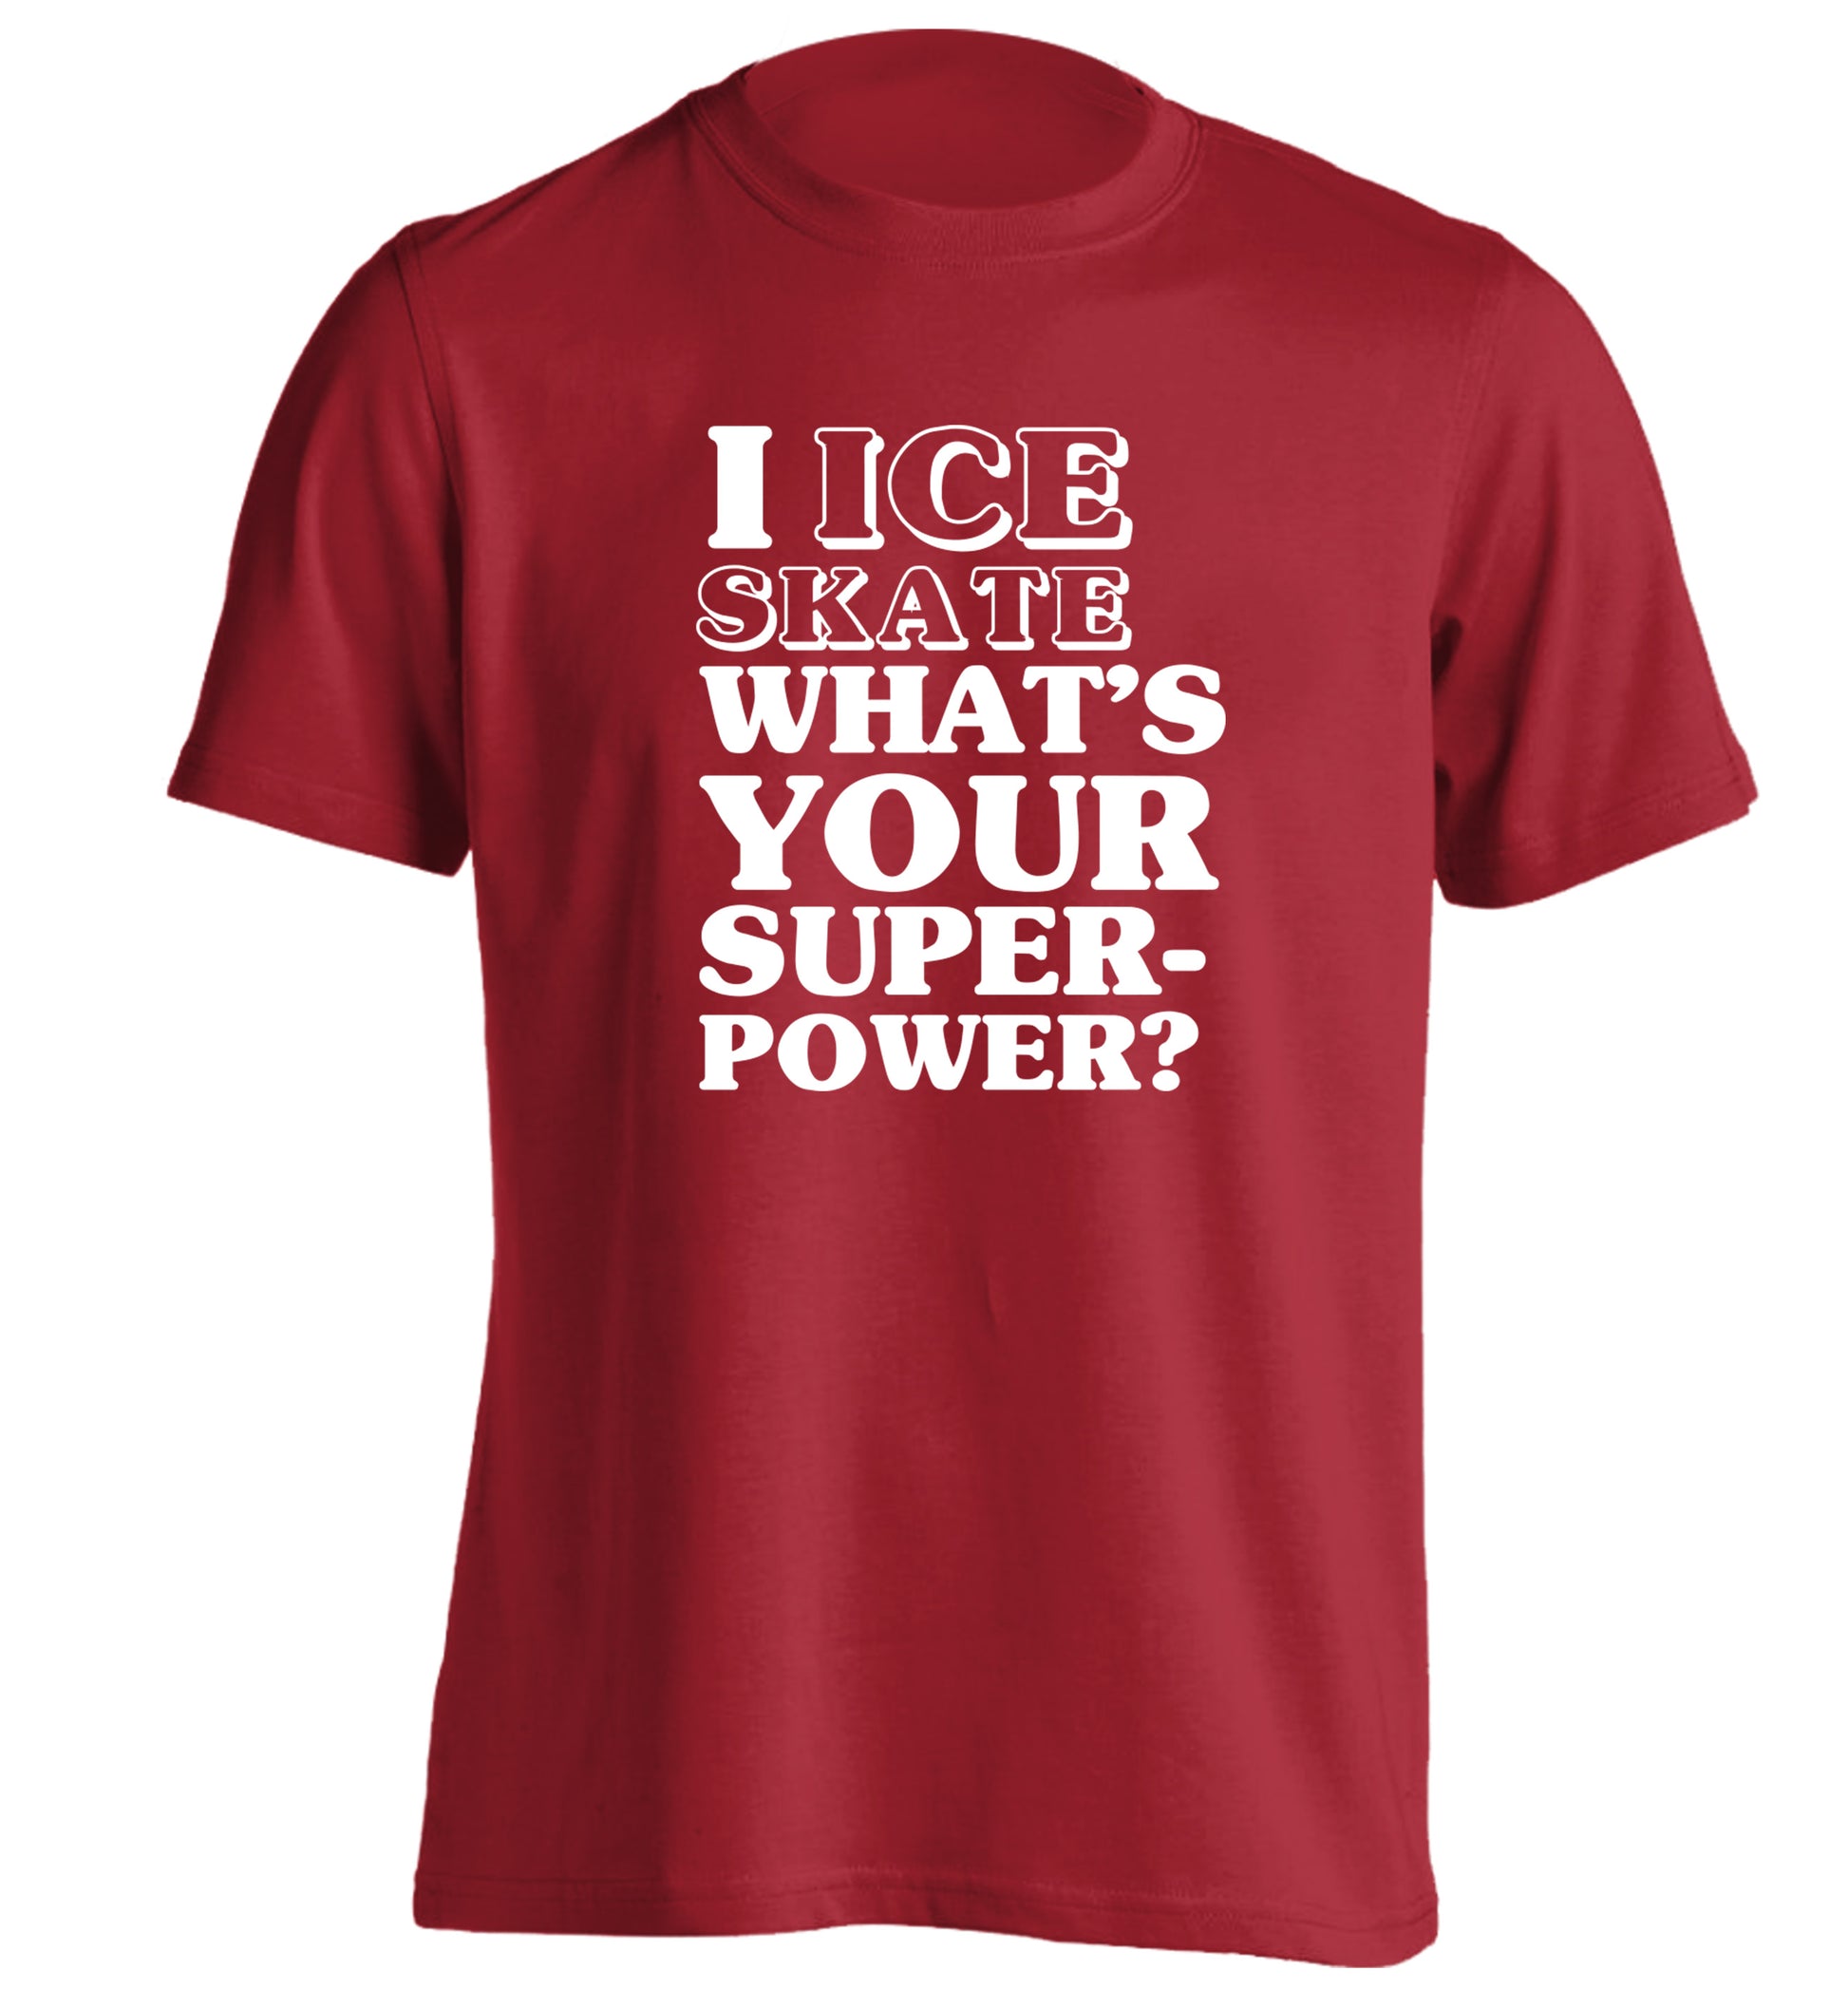 I ice skate what's your superpower? adults unisexred Tshirt 2XL